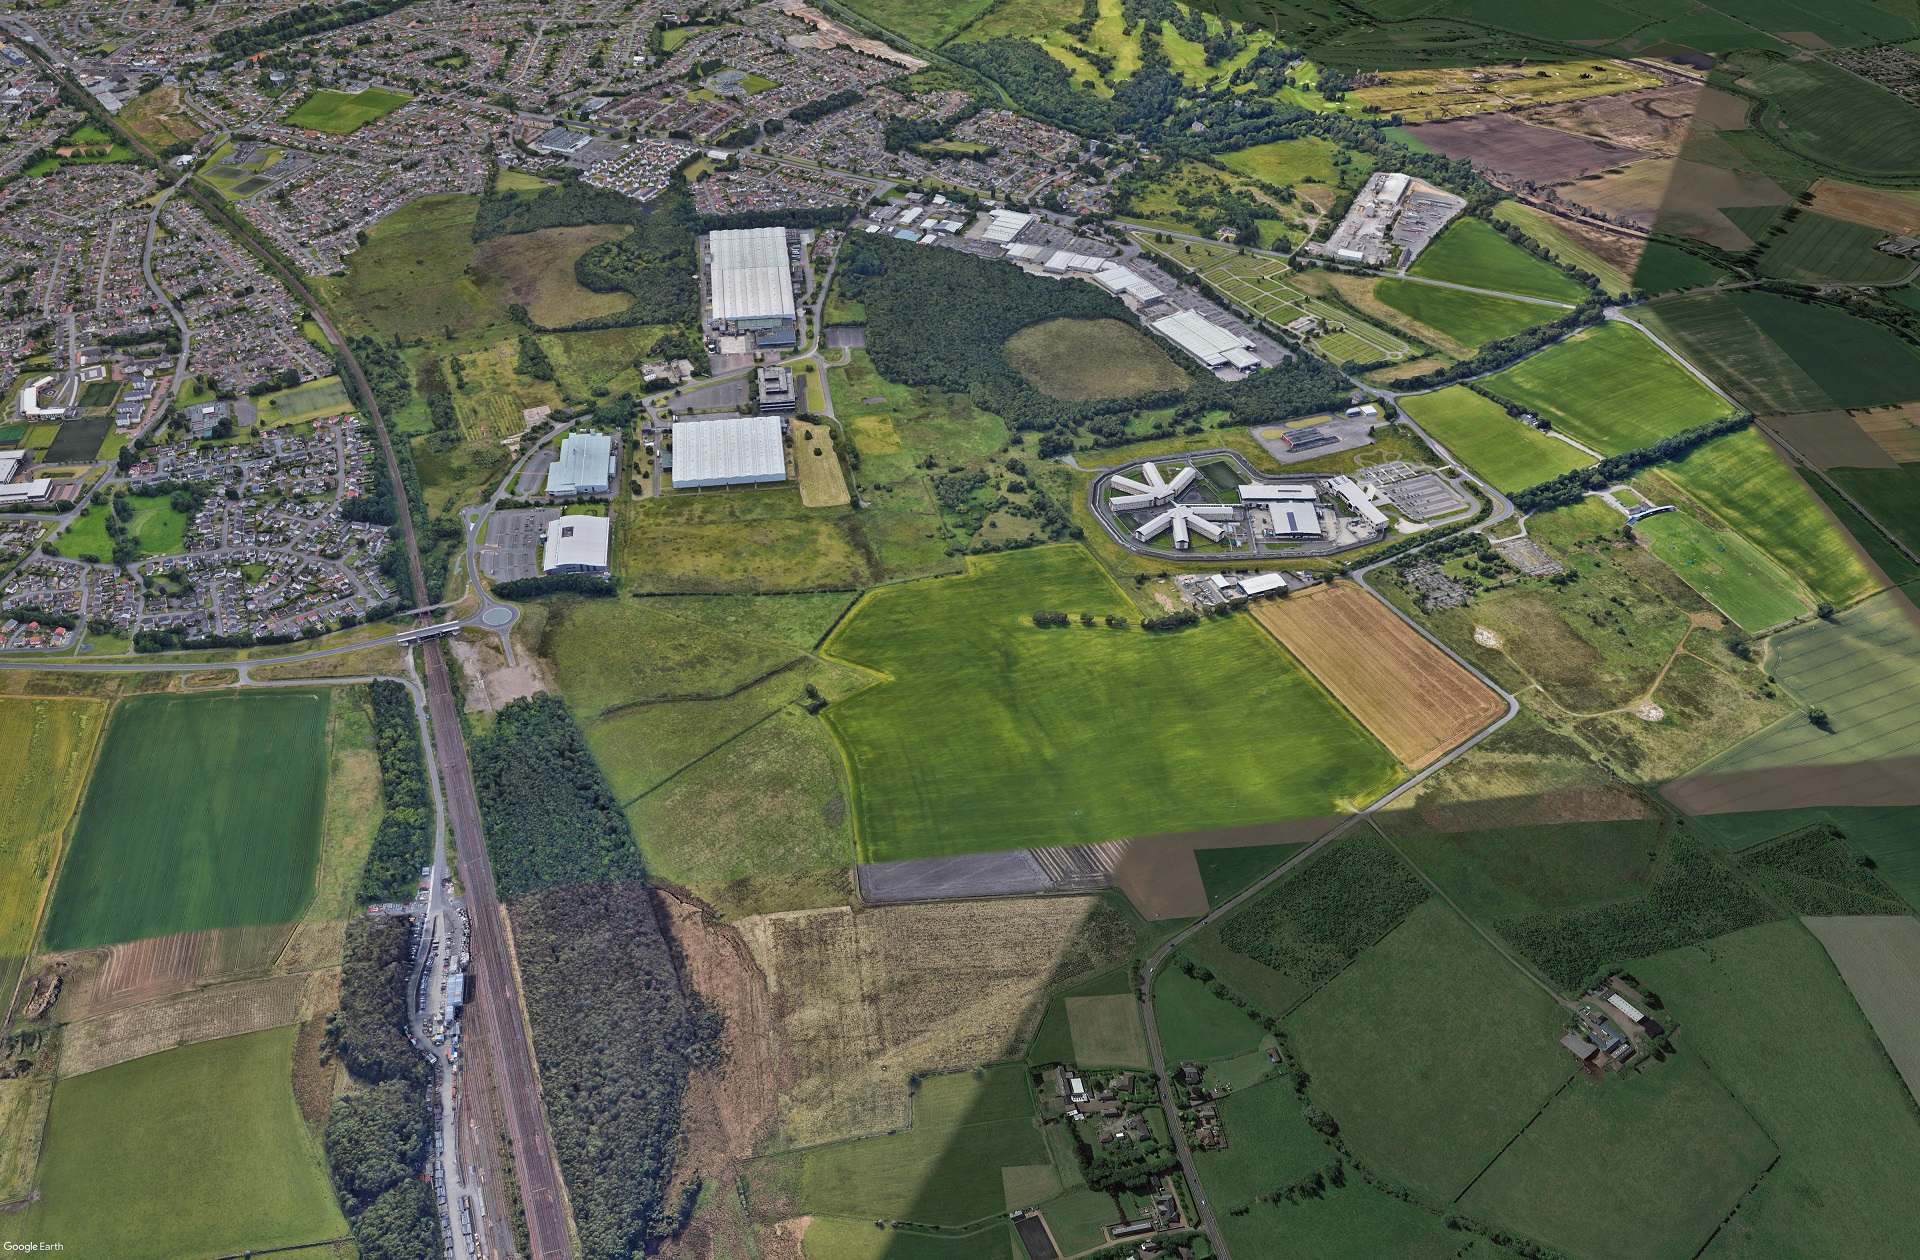 Aerial view of Westerhill in Bishopbriggs